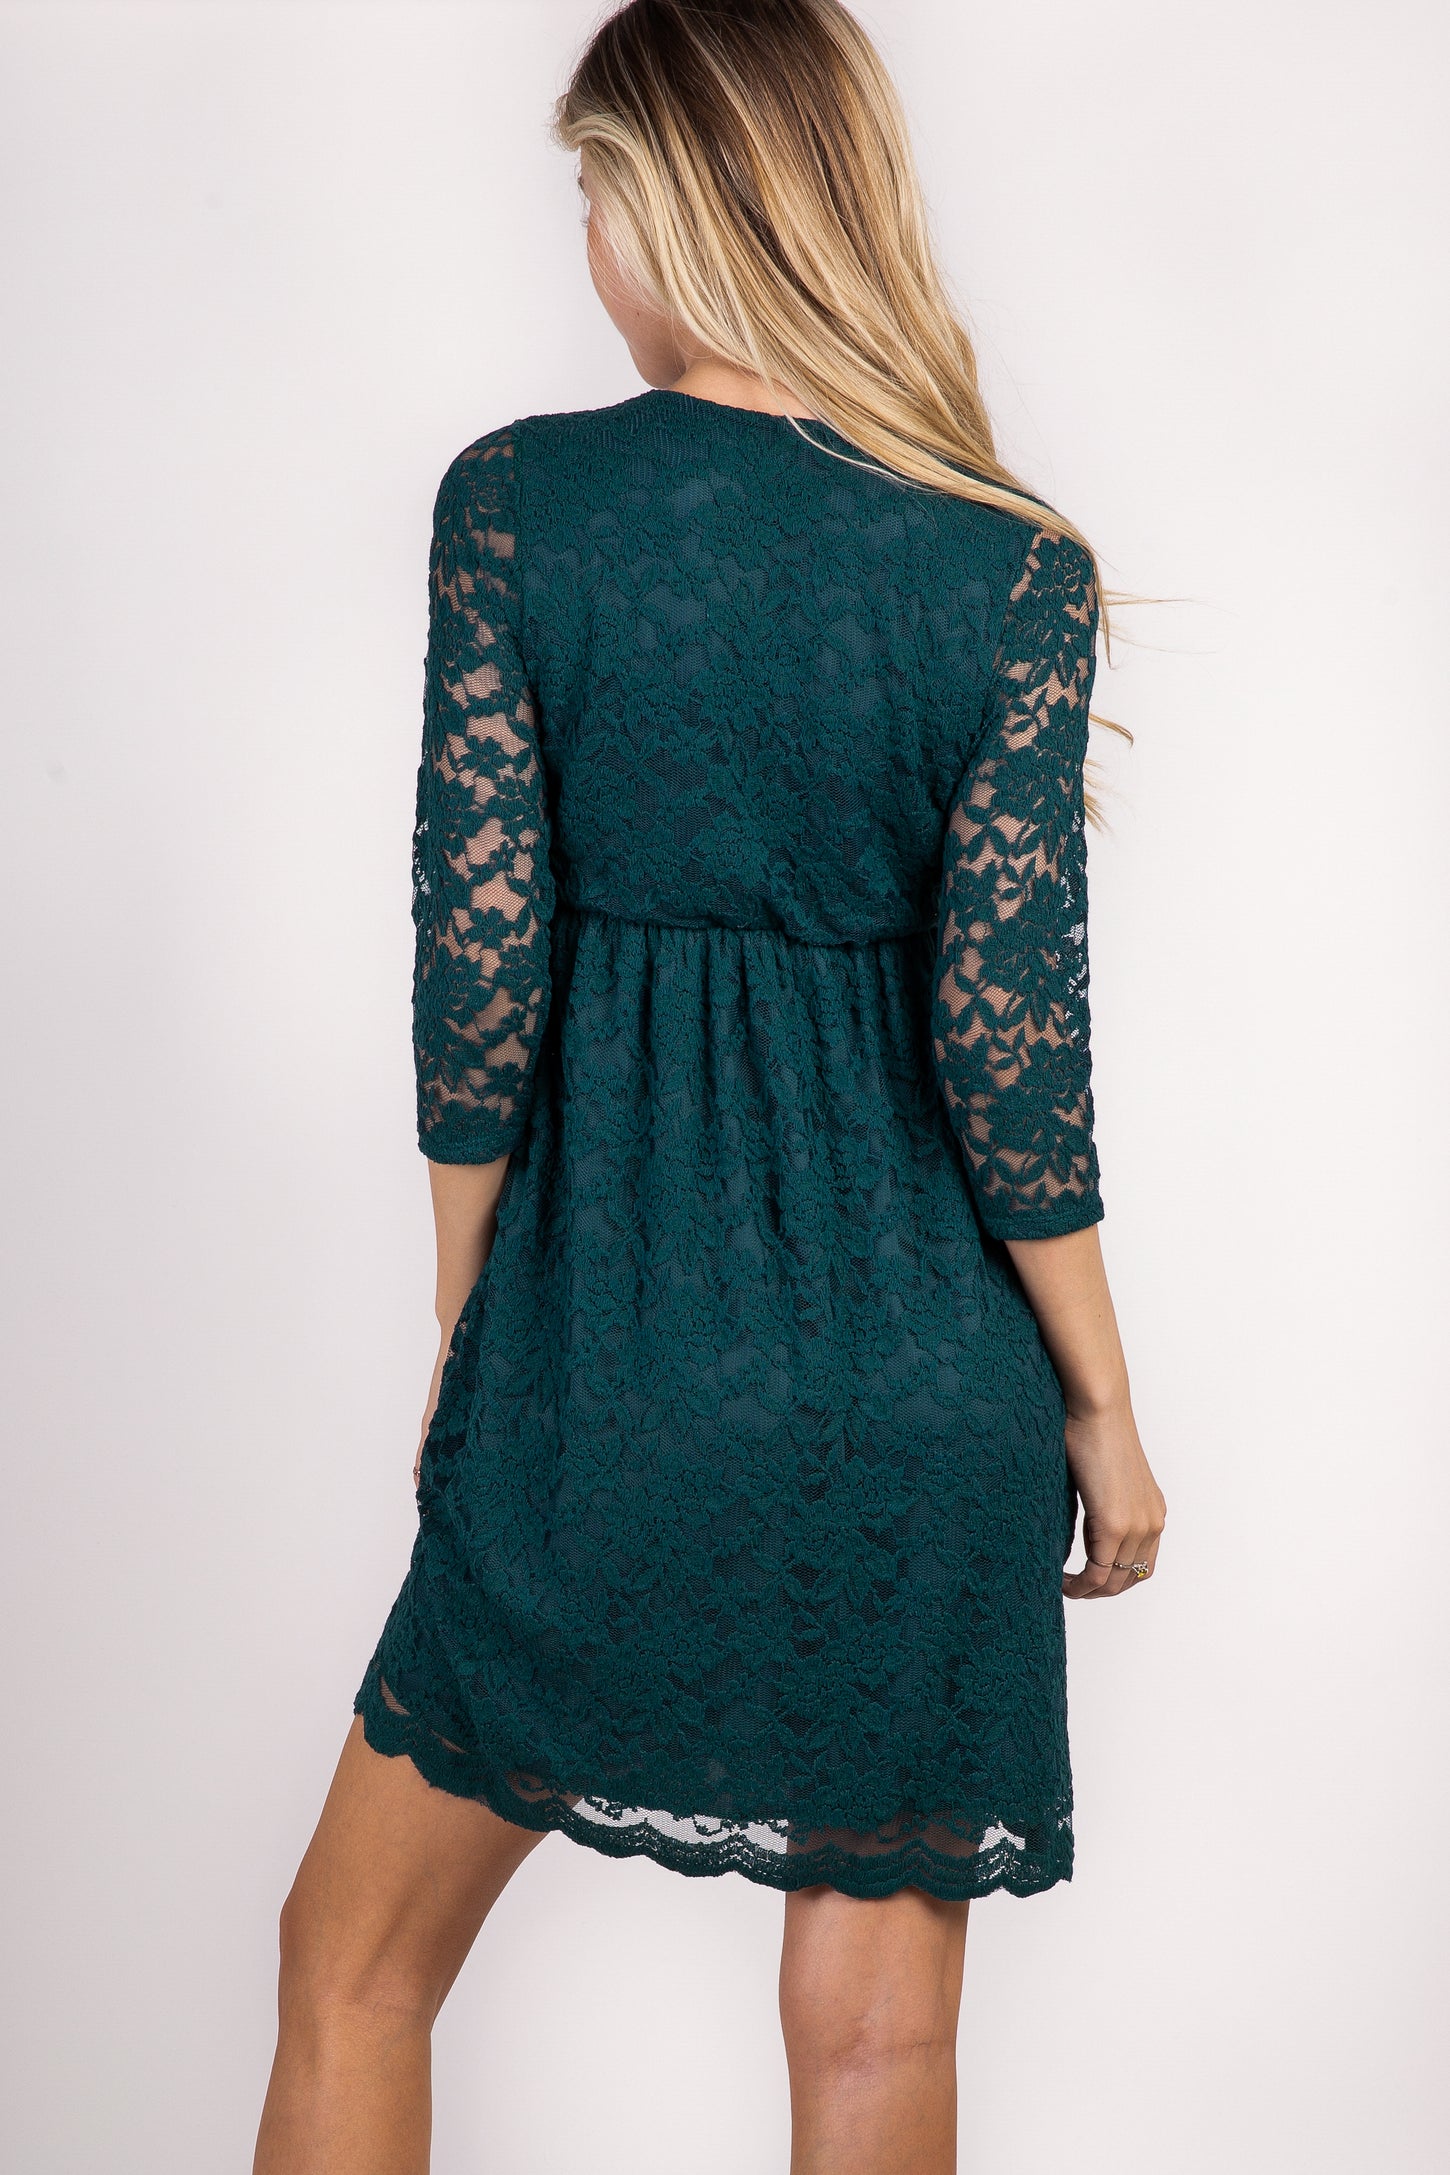 Wrap PinkBlush Green Lace Dress– Overlay Forest